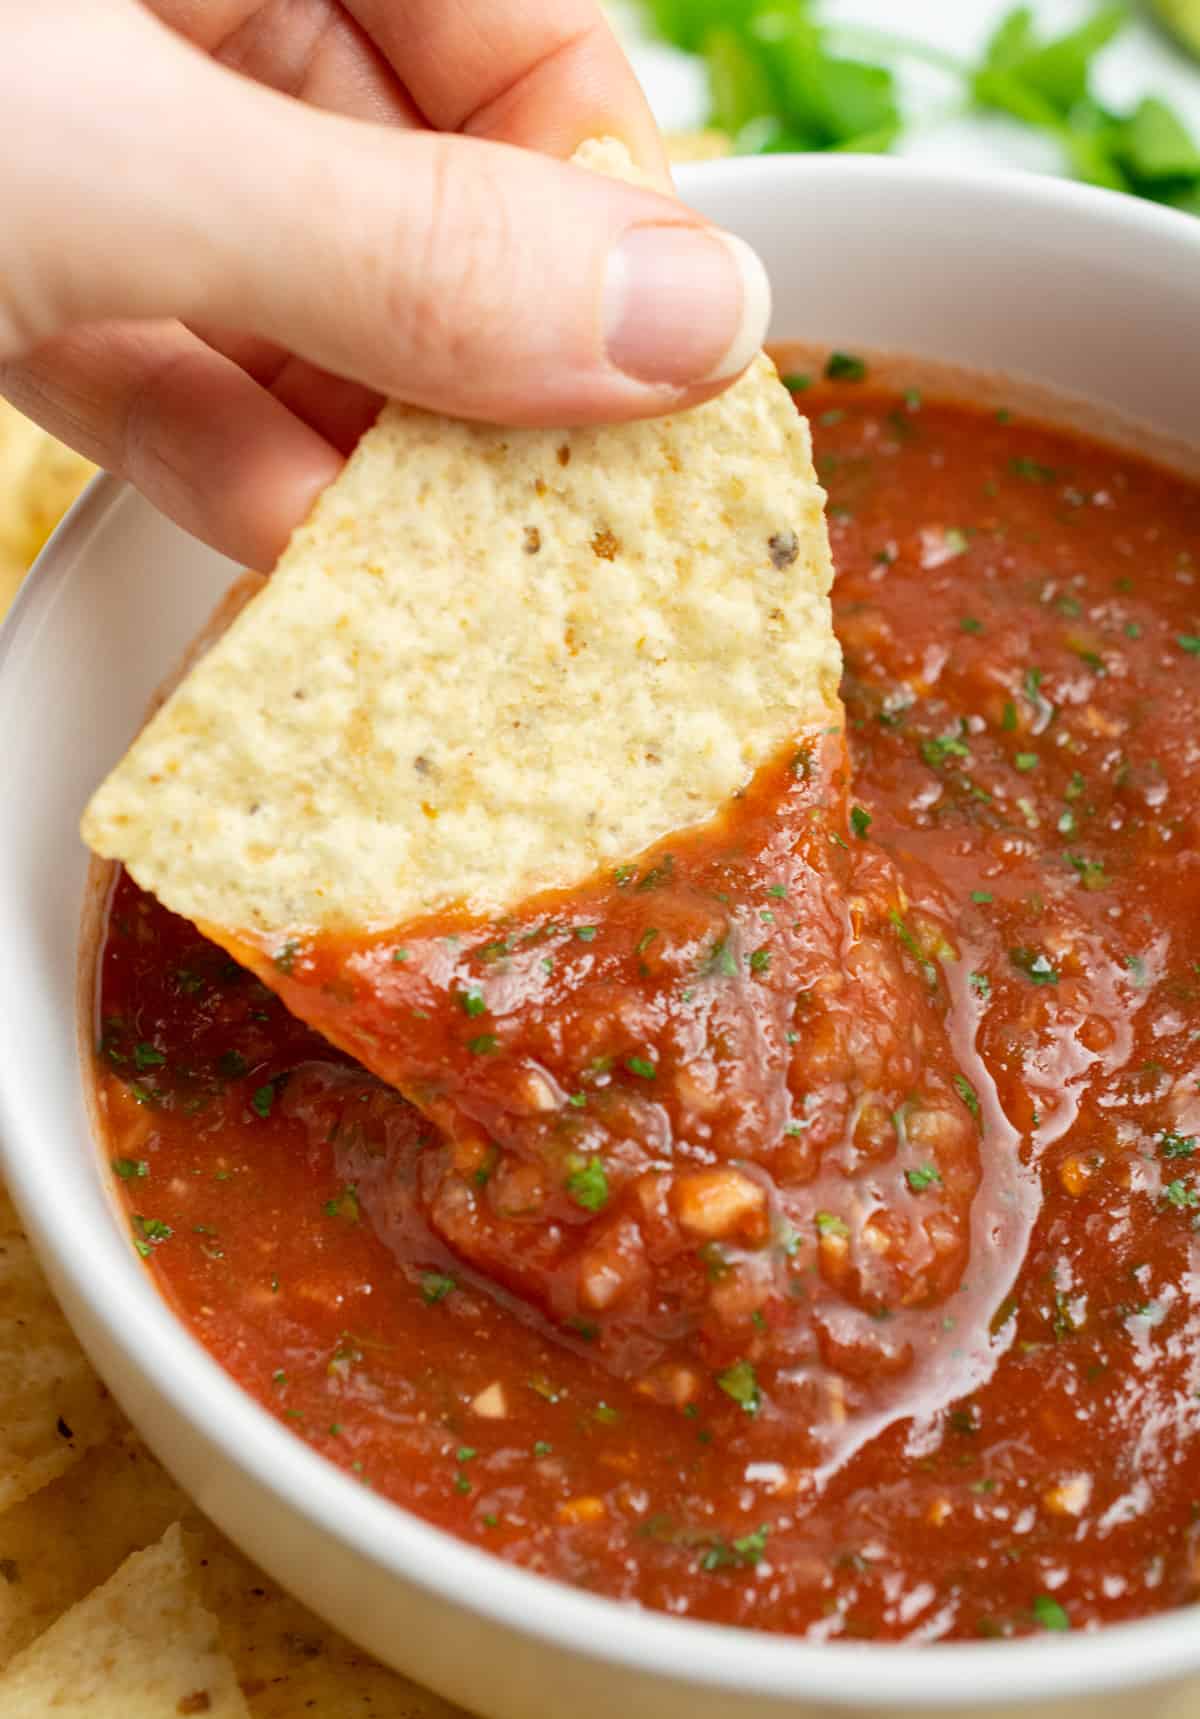 Homemade salsa in a bowl with a hand dipping a tortilla chip.